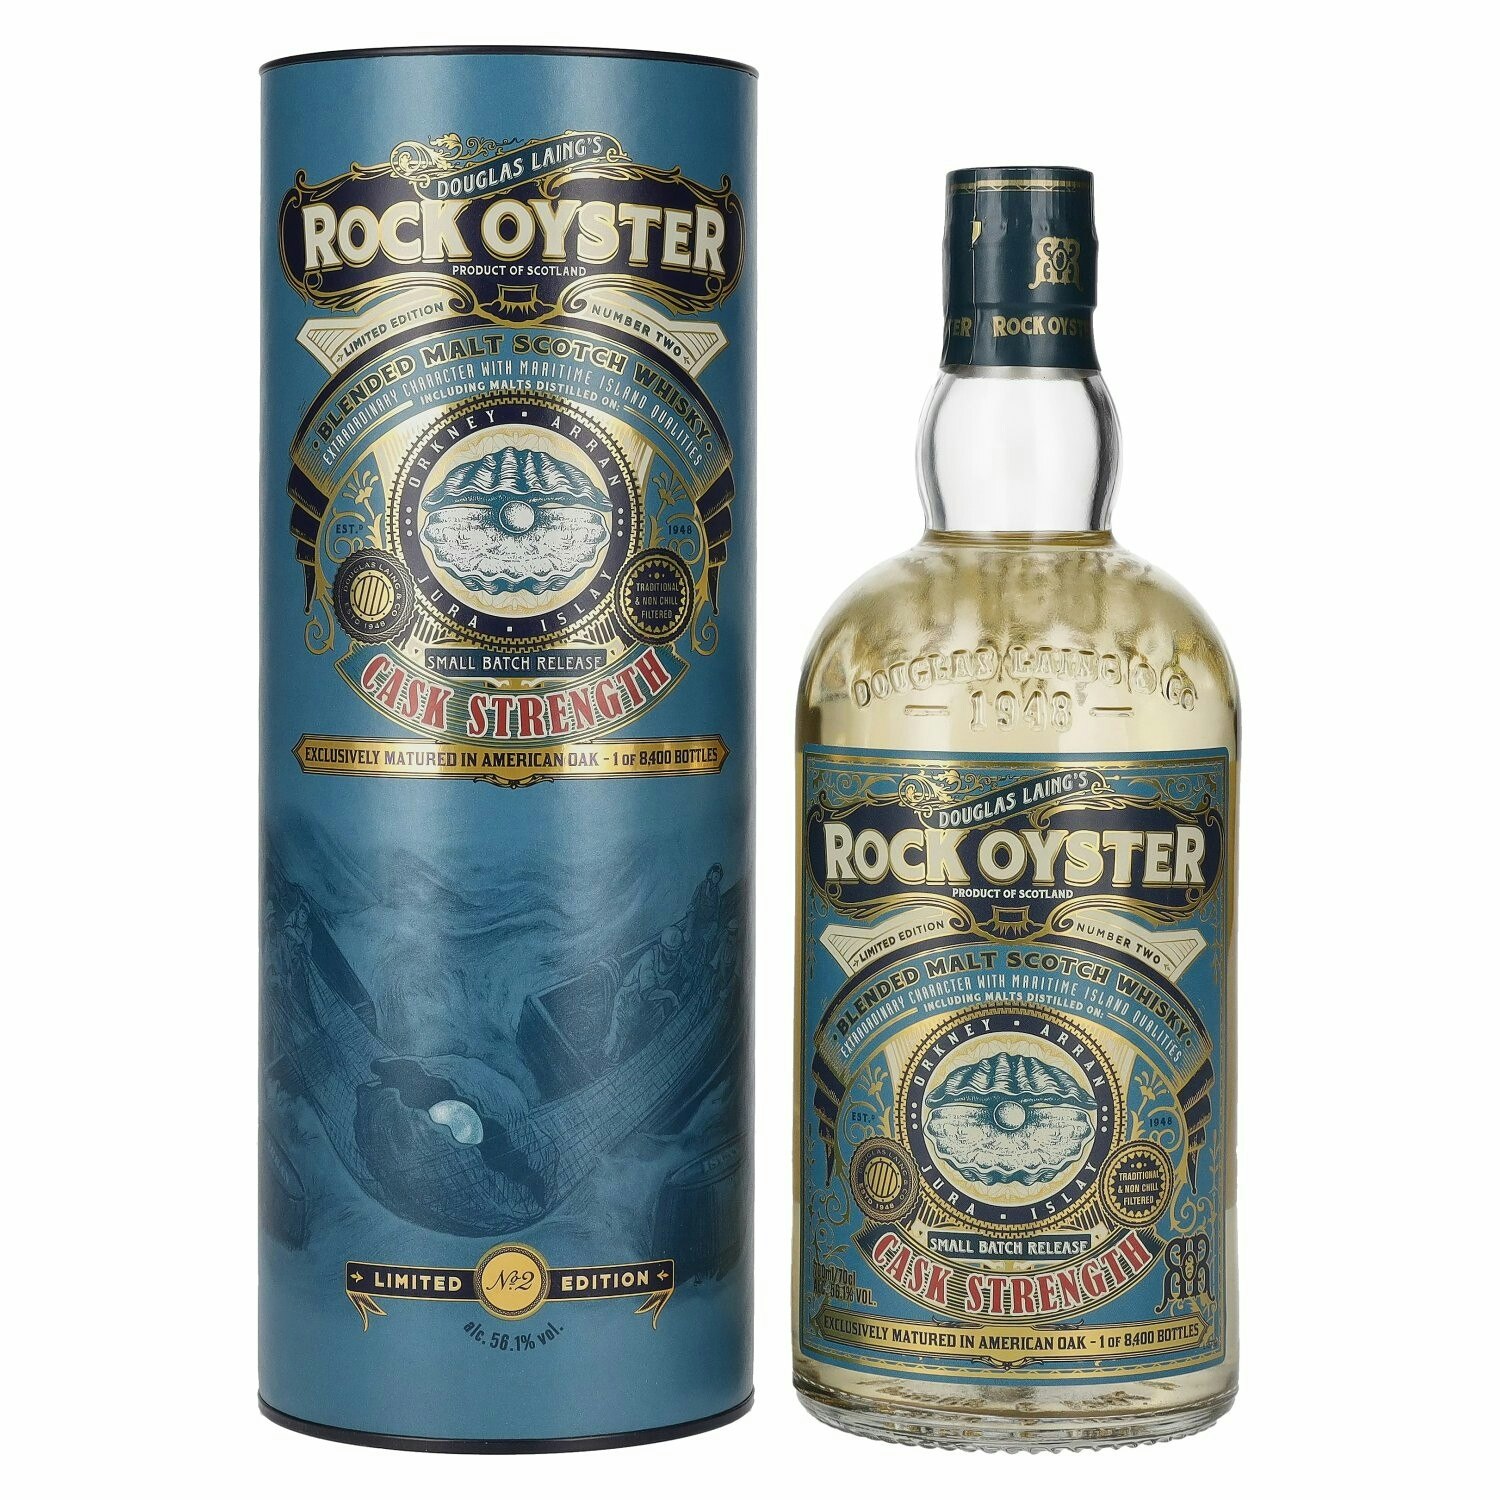 Douglas Laing ROCK OYSTER CASK STRENGTH Limited Edition No. 2 56,1% Vol. 0,7l in Giftbox